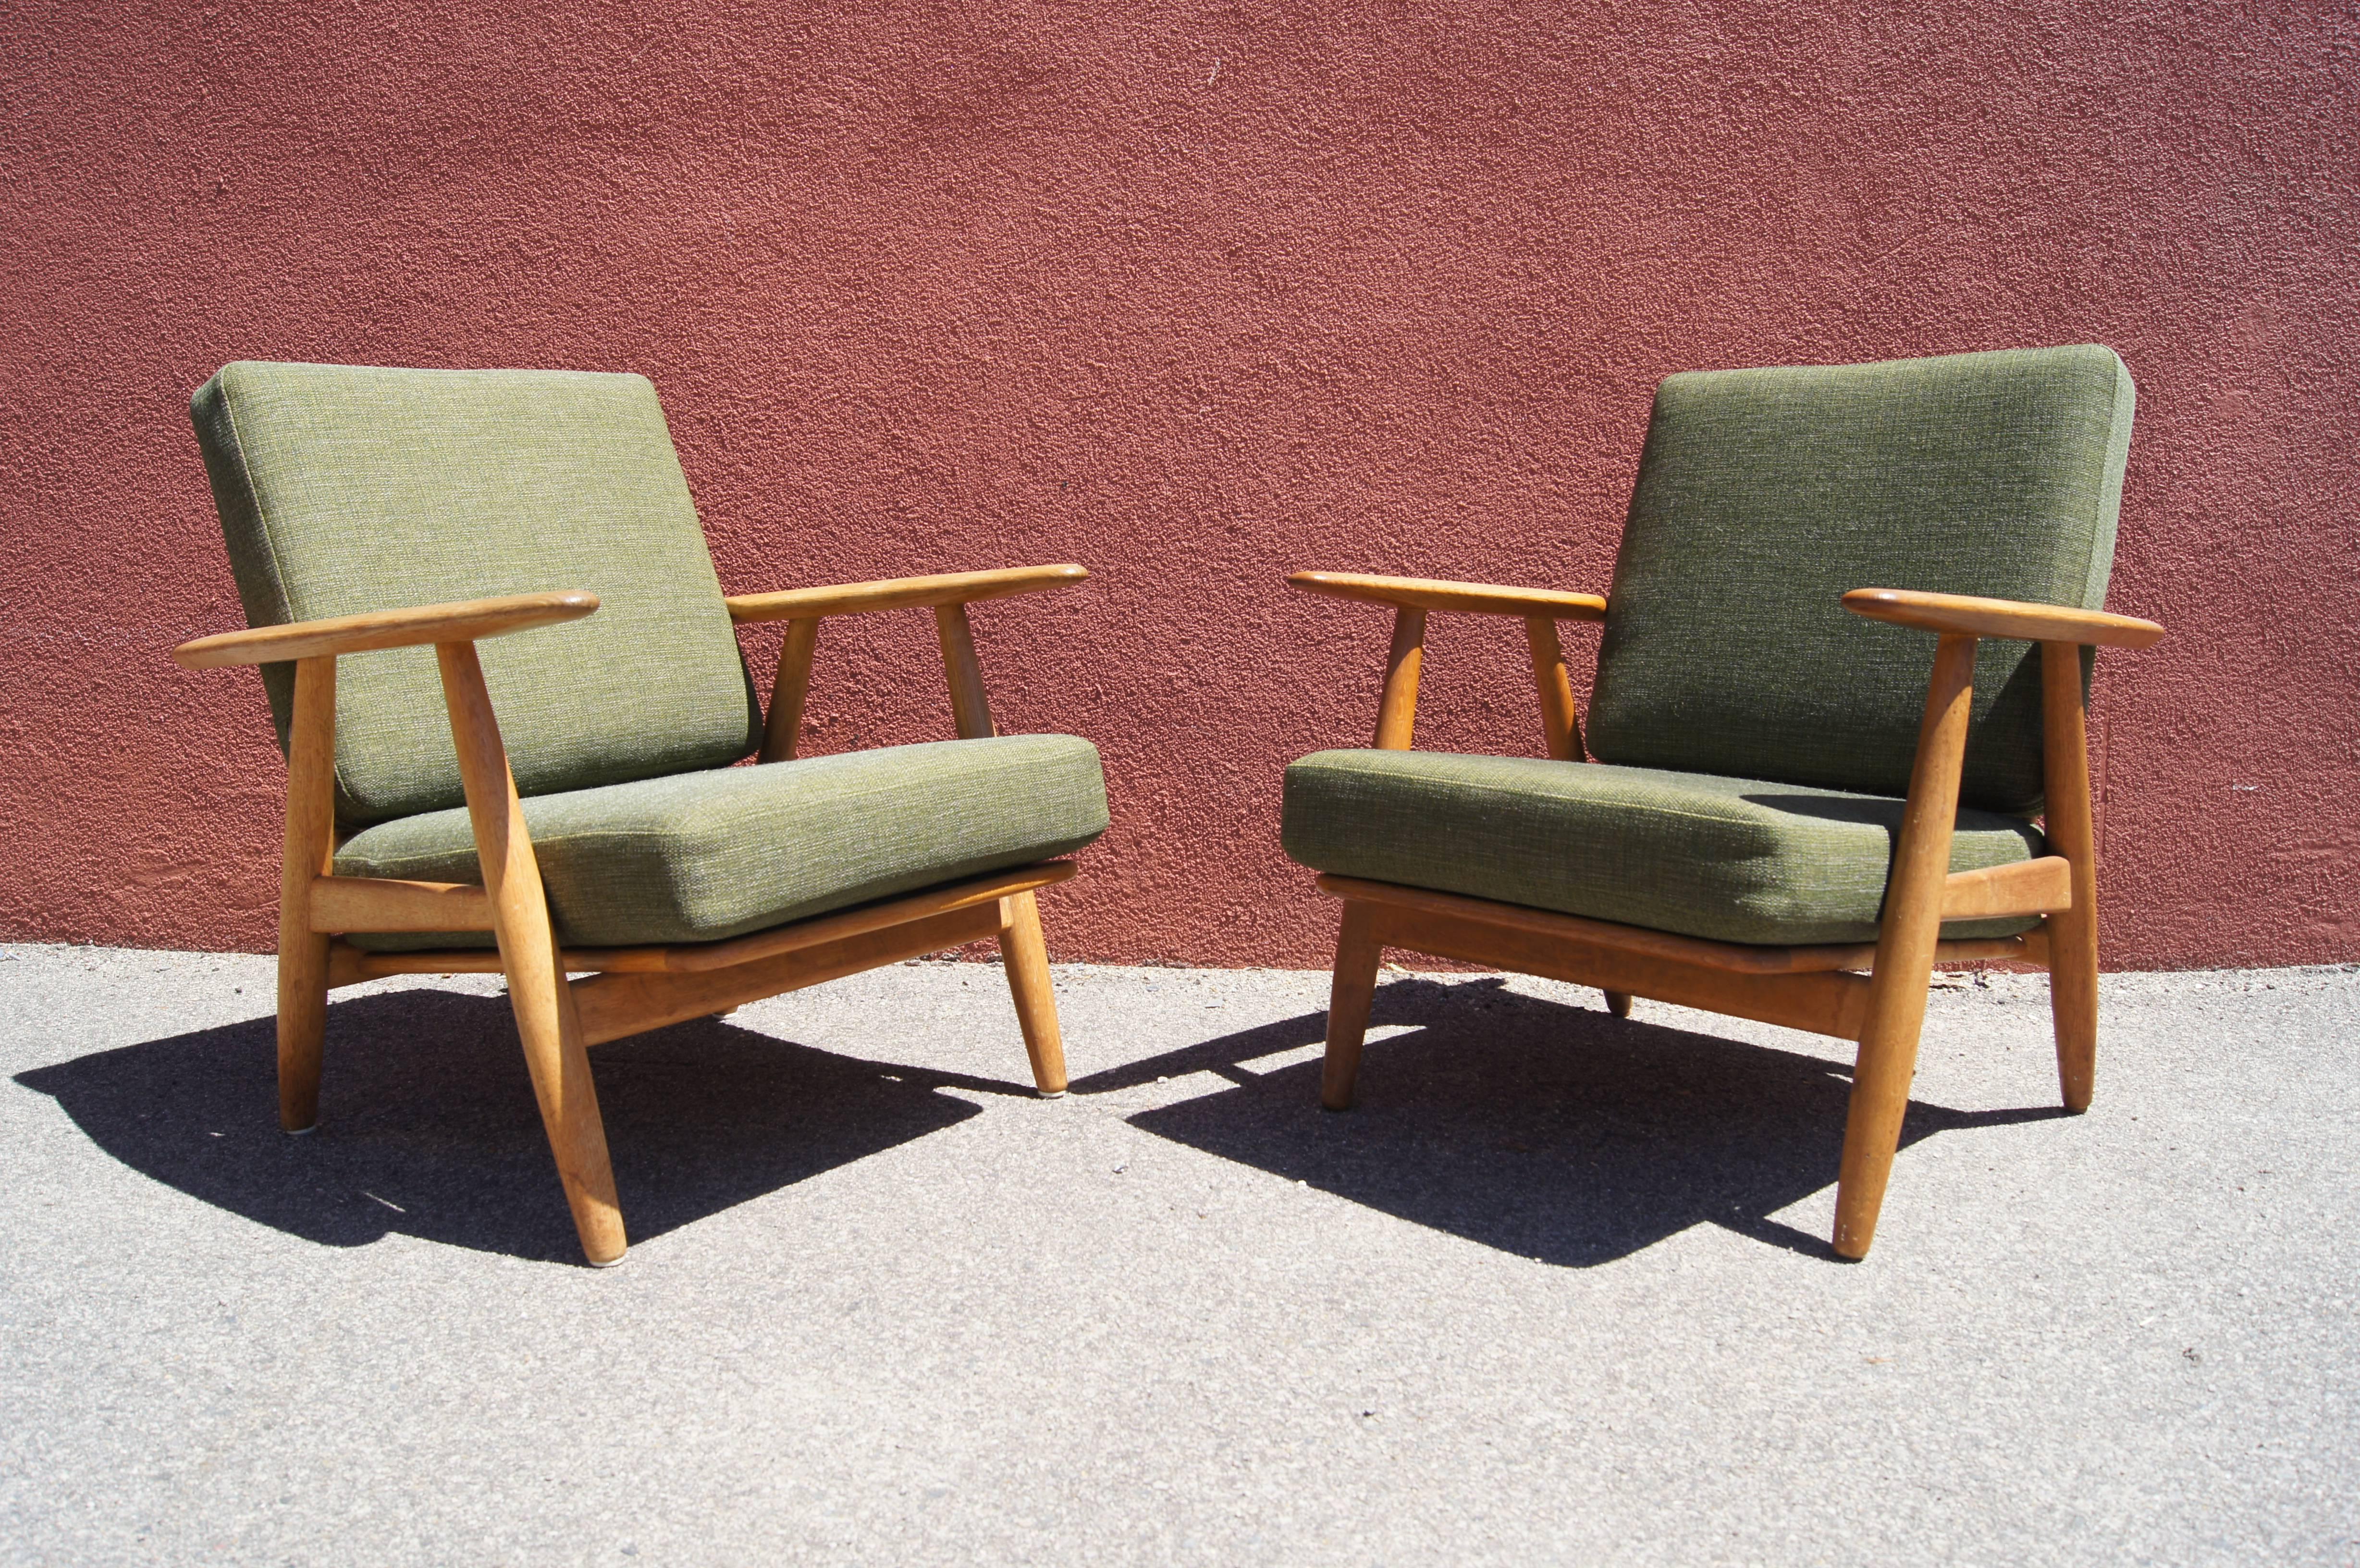 Hans Wegner designed these lounge chairs, model GE240, for GETAMA in 1955. The gently curved armrests of the solid oak frame inspired its popular name: the cigar chair. This pair features new foam cushions upholstered in a restful moss green.